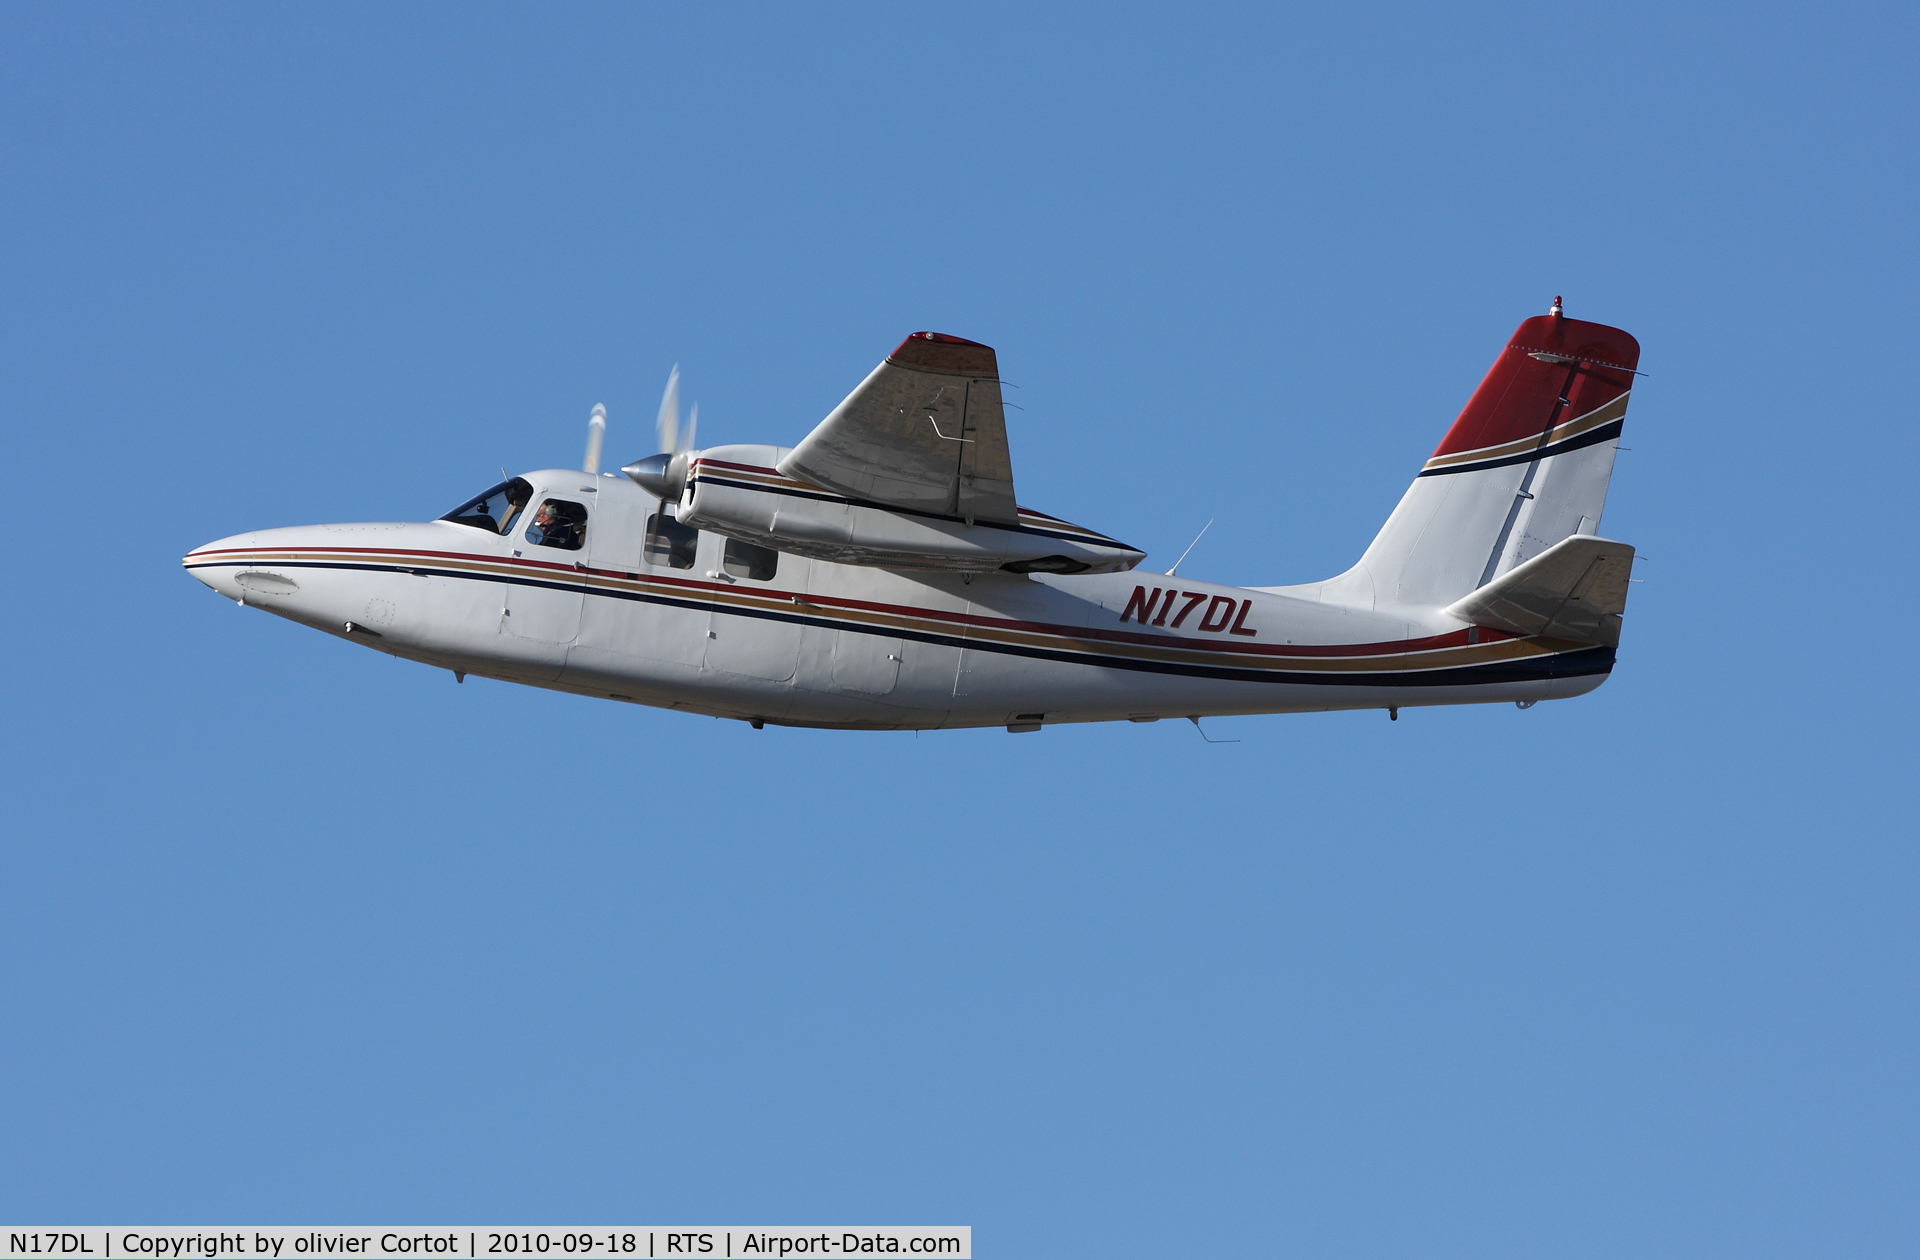 N17DL, 1969 Aero Commander 500 S C/N 1866-42, Taking off during the Reno Air Races